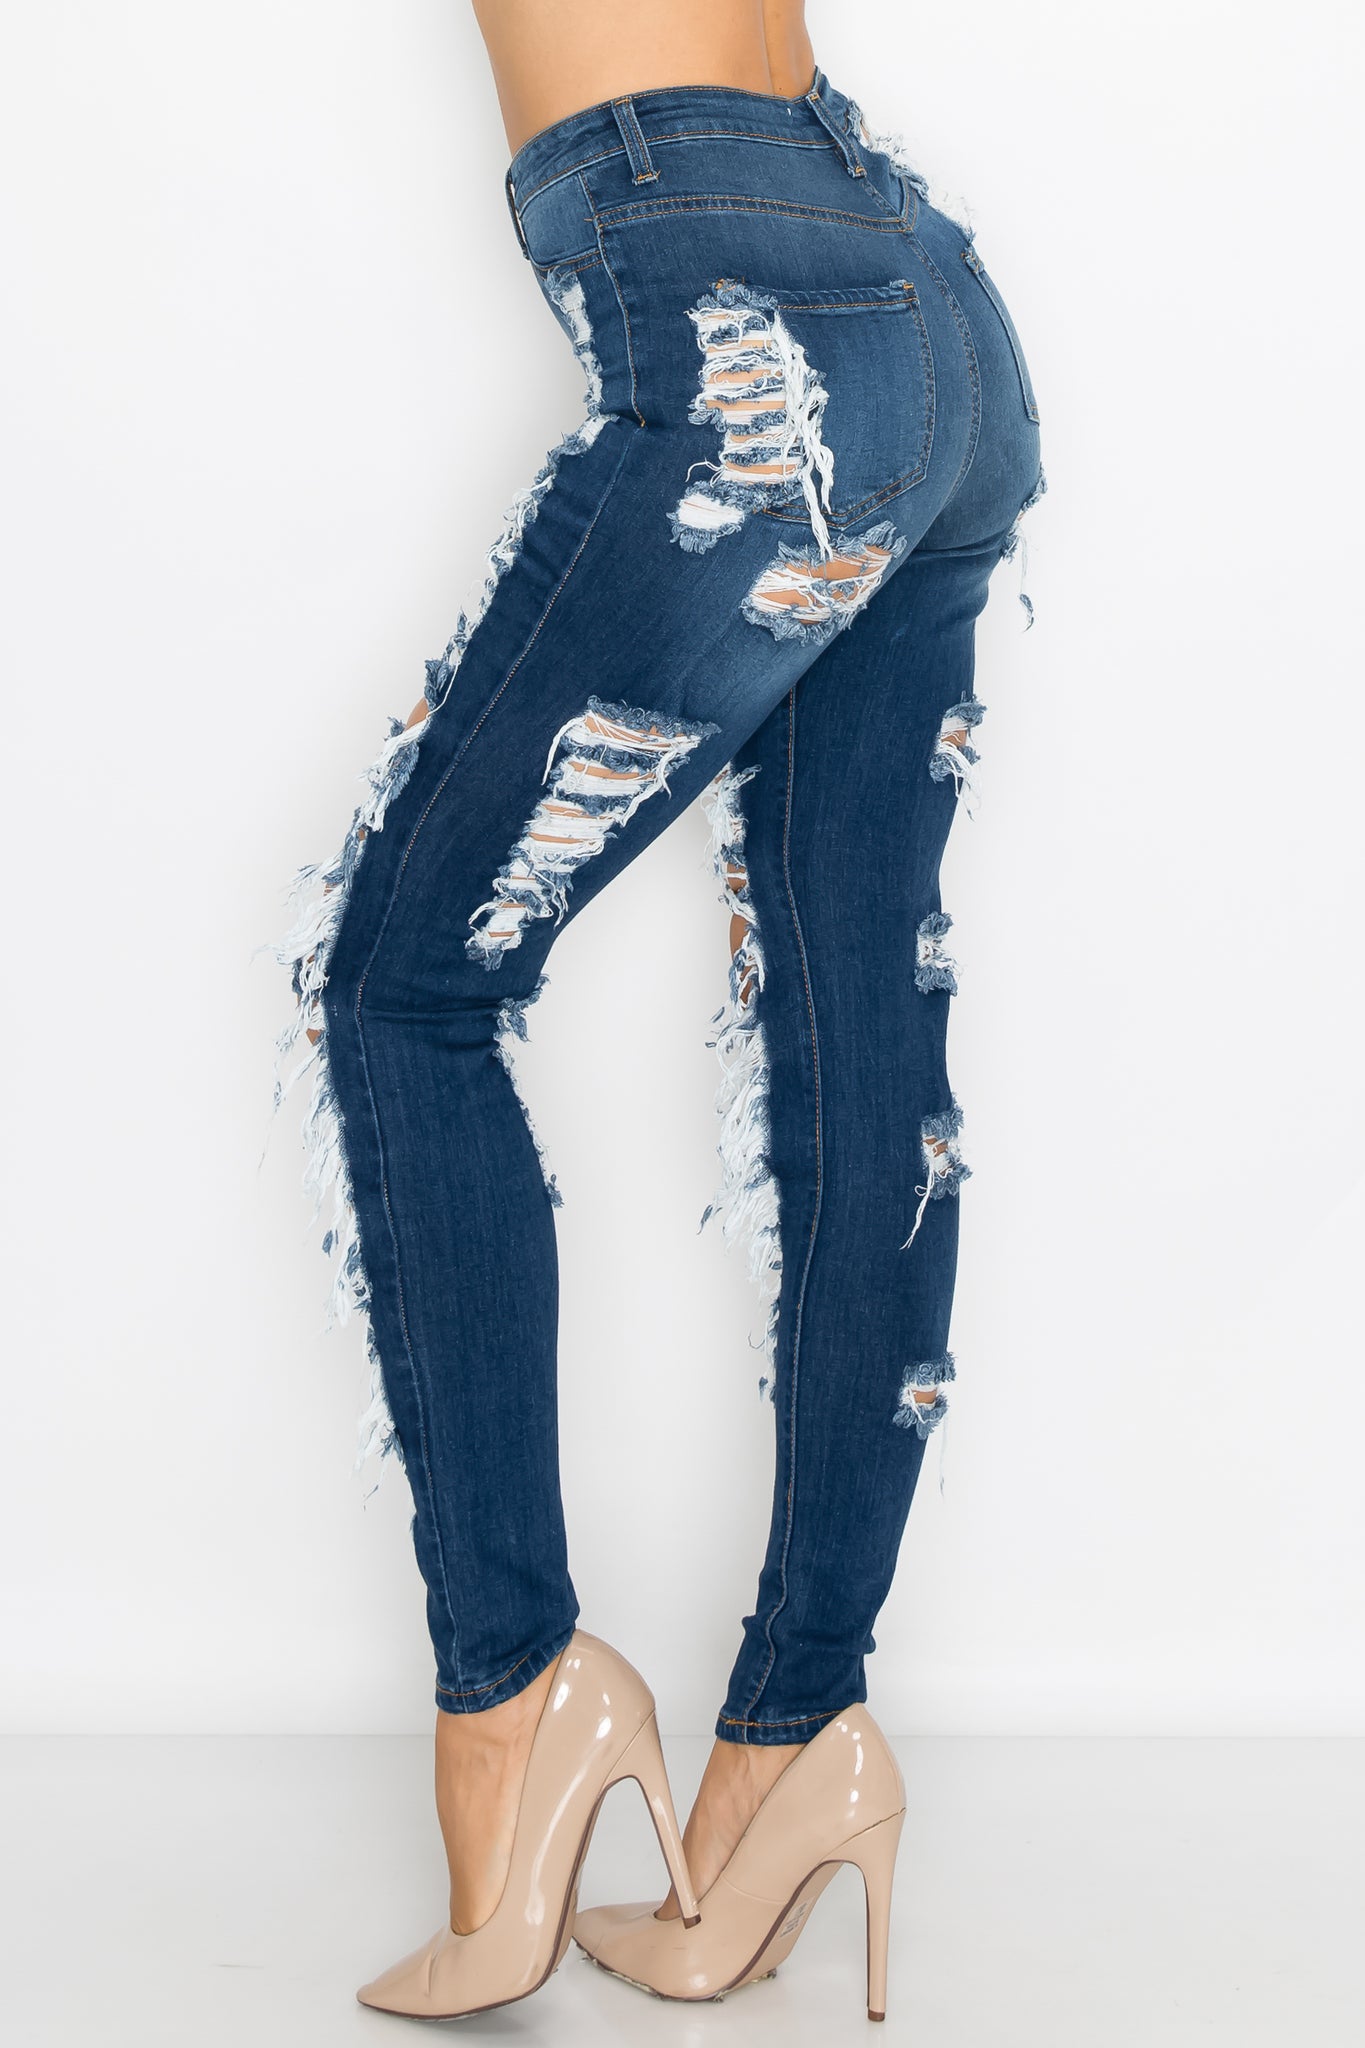 Women's Ripped Jeans, Distressed Jeans